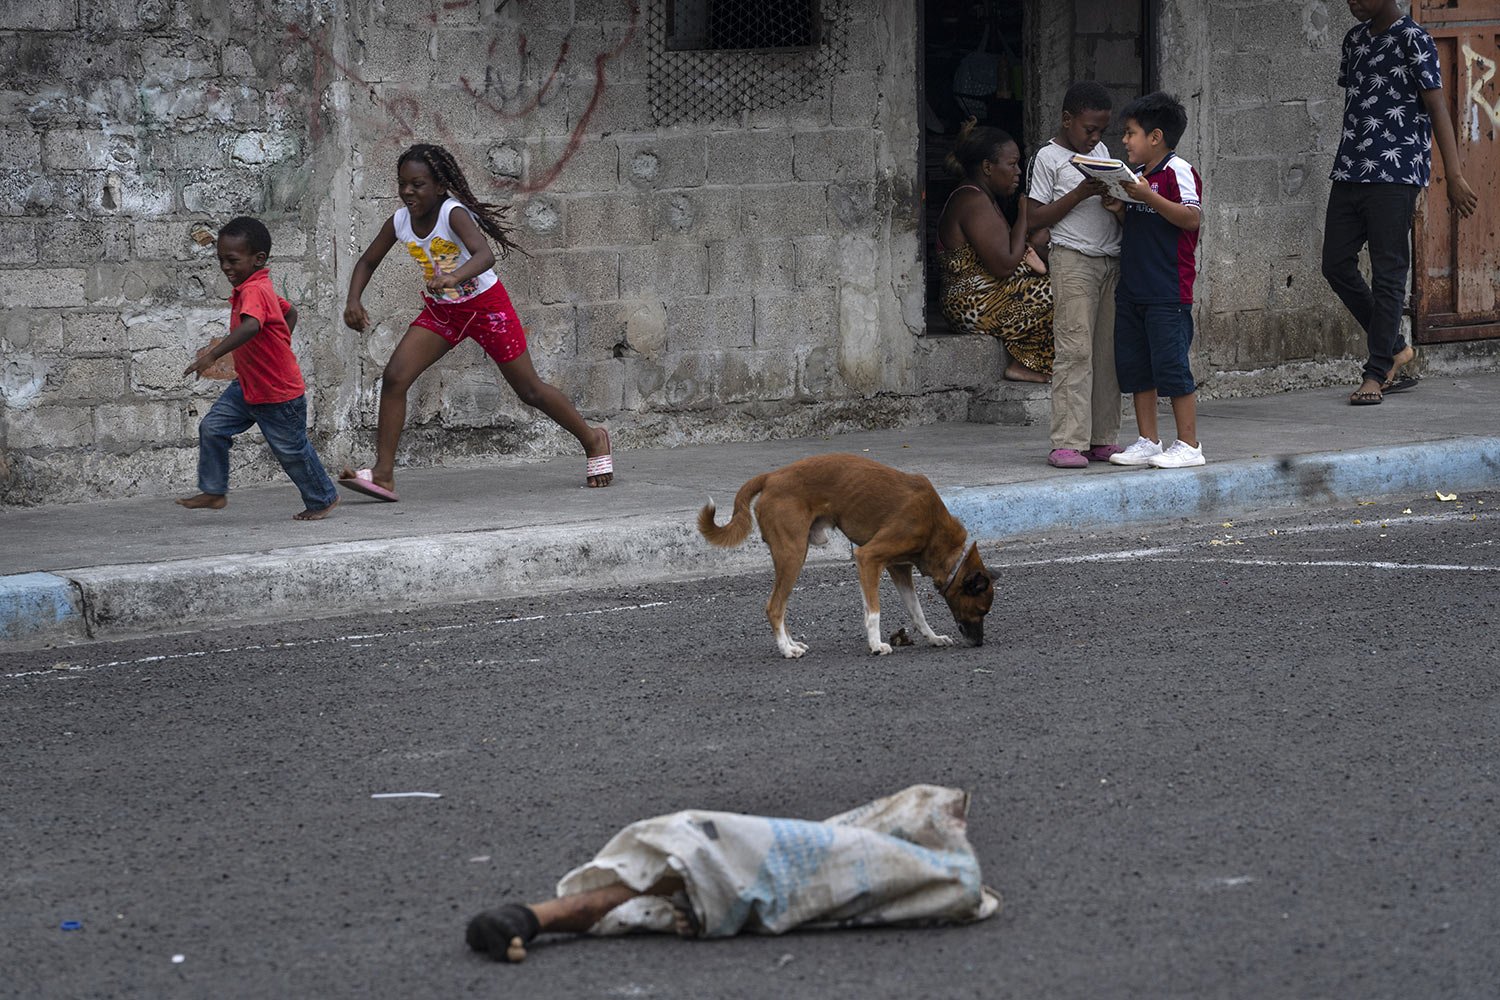  The legs of a dismembered man protrude from a bag on the street where children play and dogs roam in the Colinas de La Florida neighborhood in Guayaquil, Ecuador, Oct. 1, 2023. The legs laid there for hours before being picked up by authorities and 